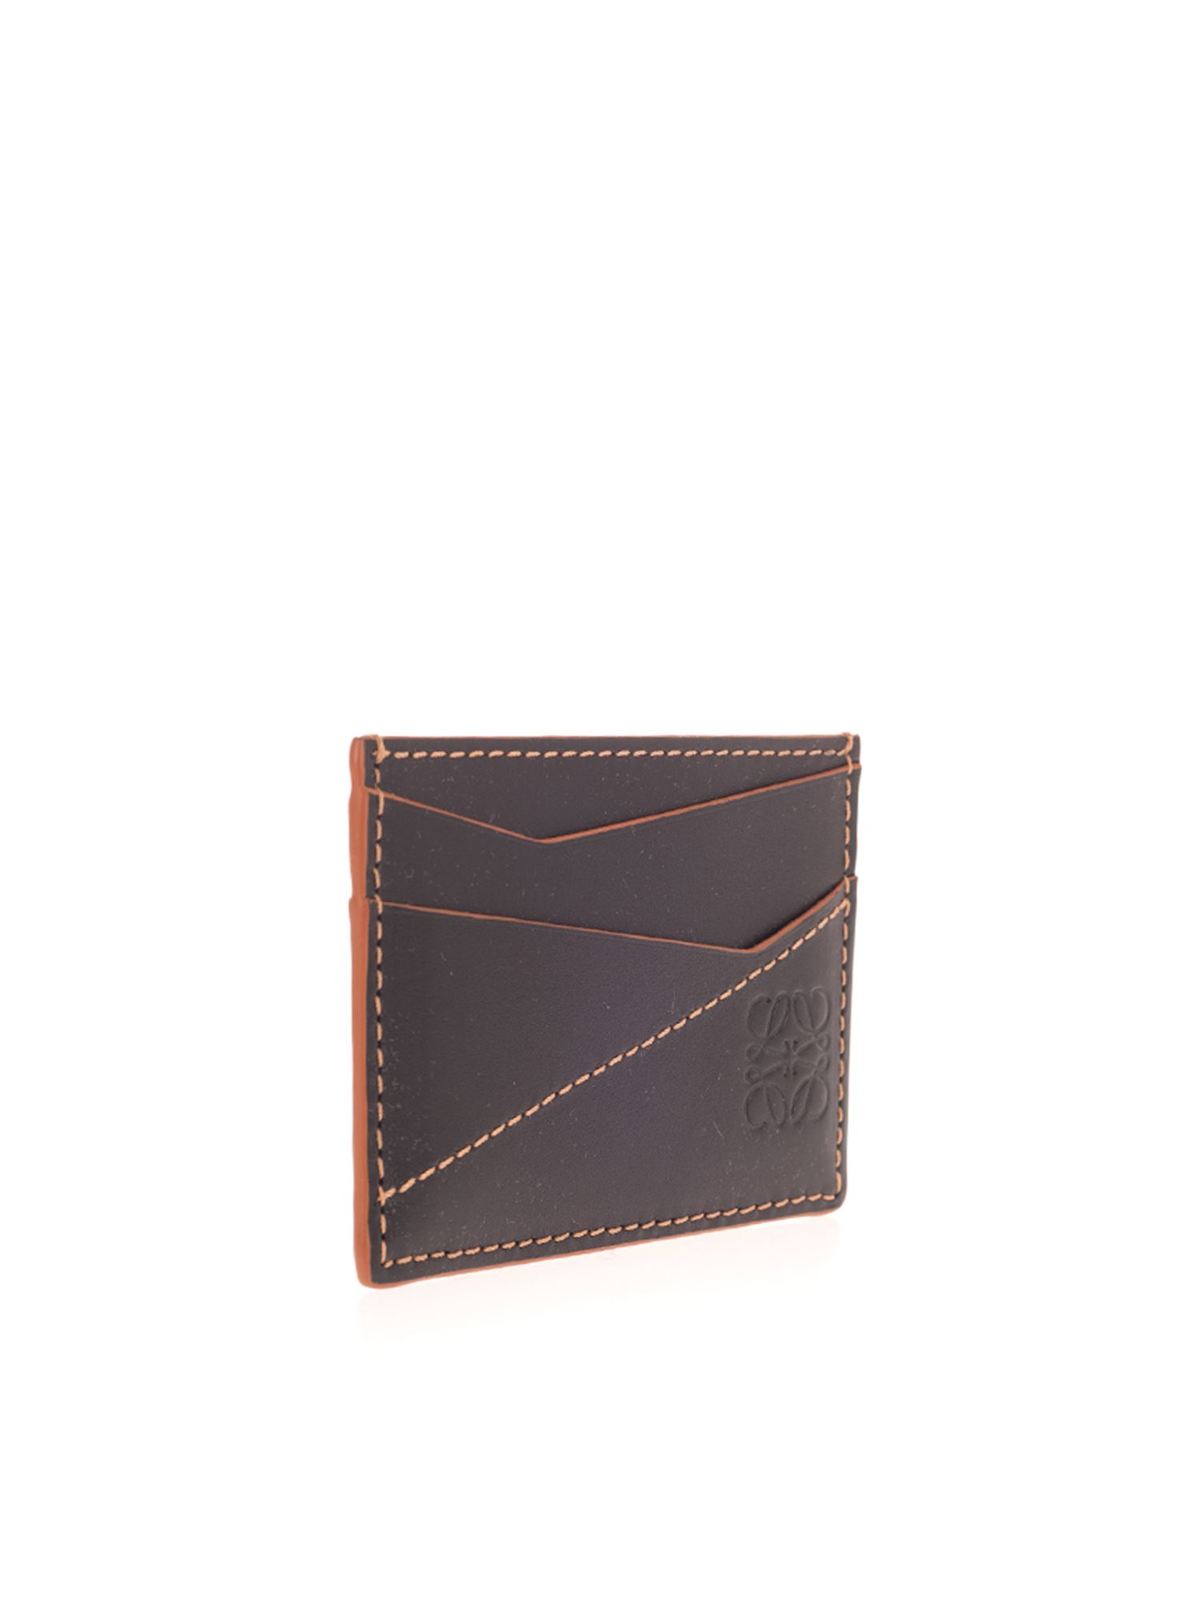 Wallets & purses Loewe - Puzzle stitching card holder in black